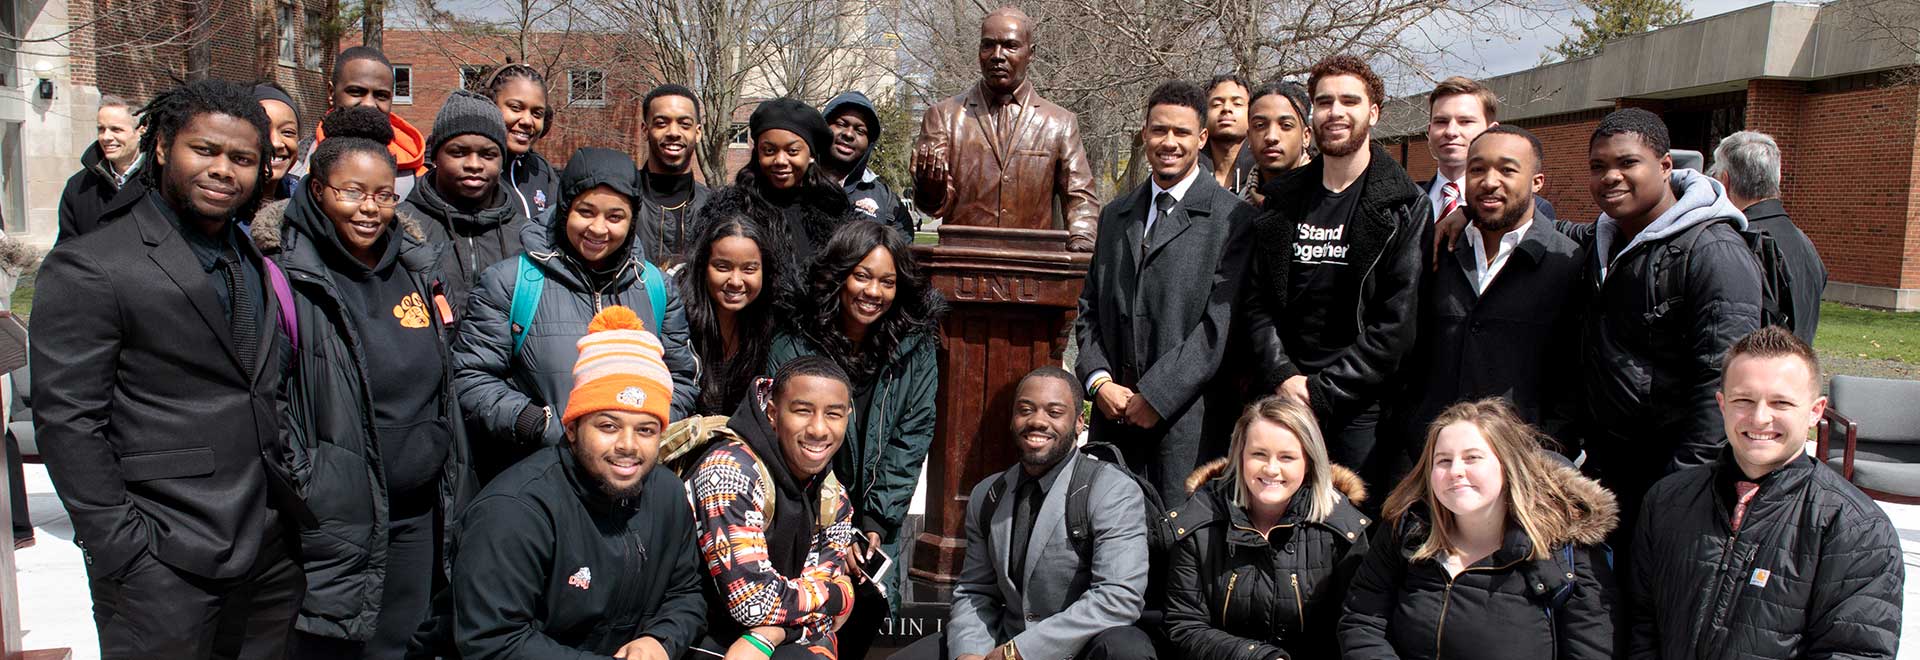 Students mark the 50-year anniversary of MLK's speech at ONU